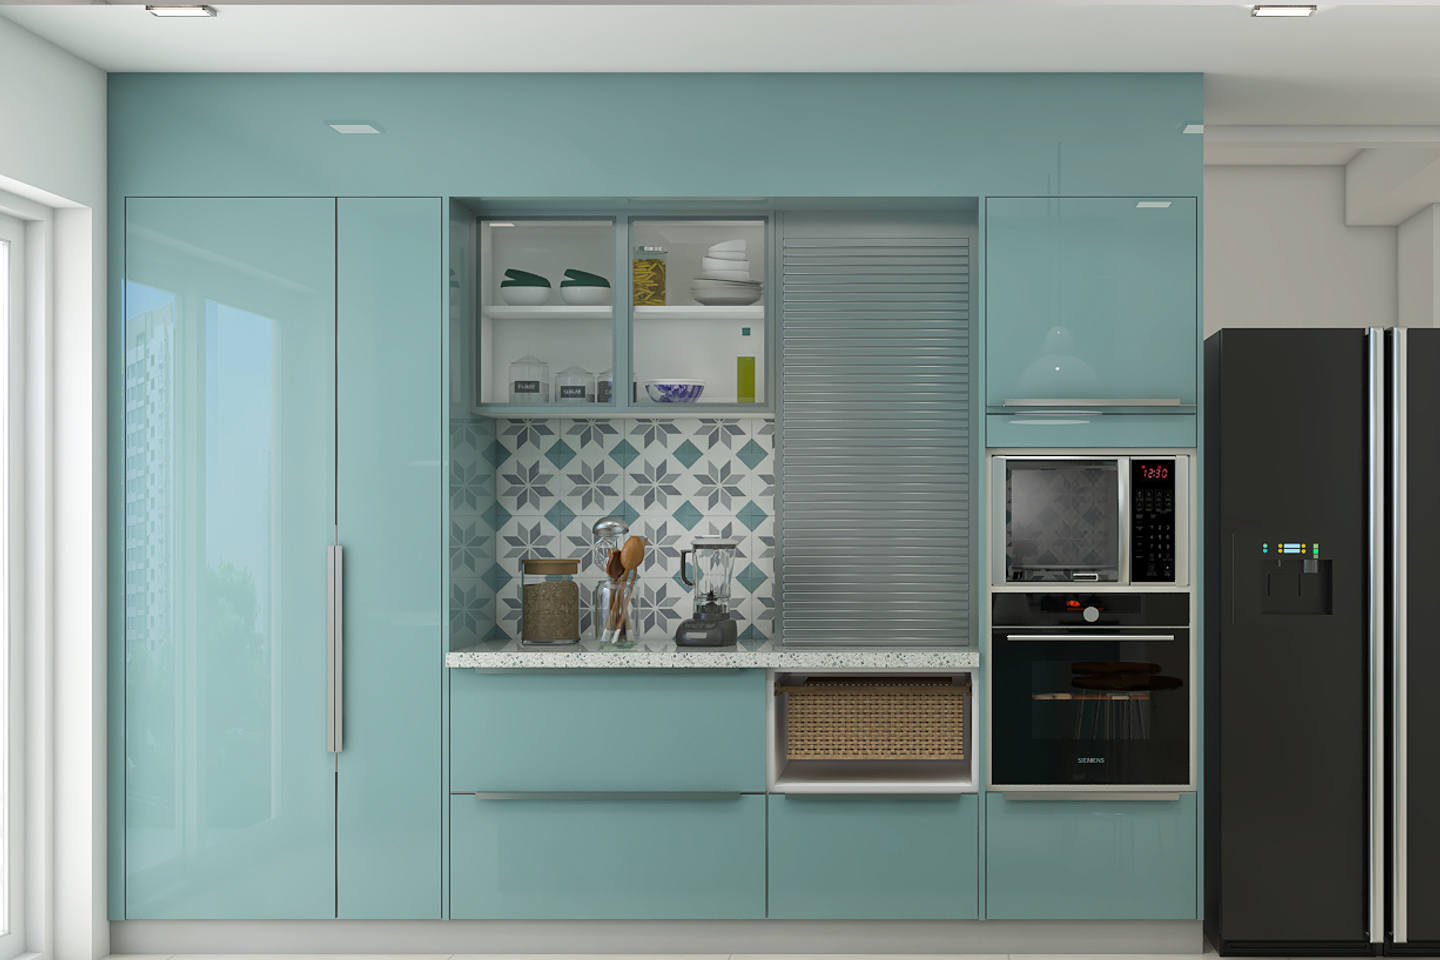 Green Modular Kitchen Design With Glossy Cabinets